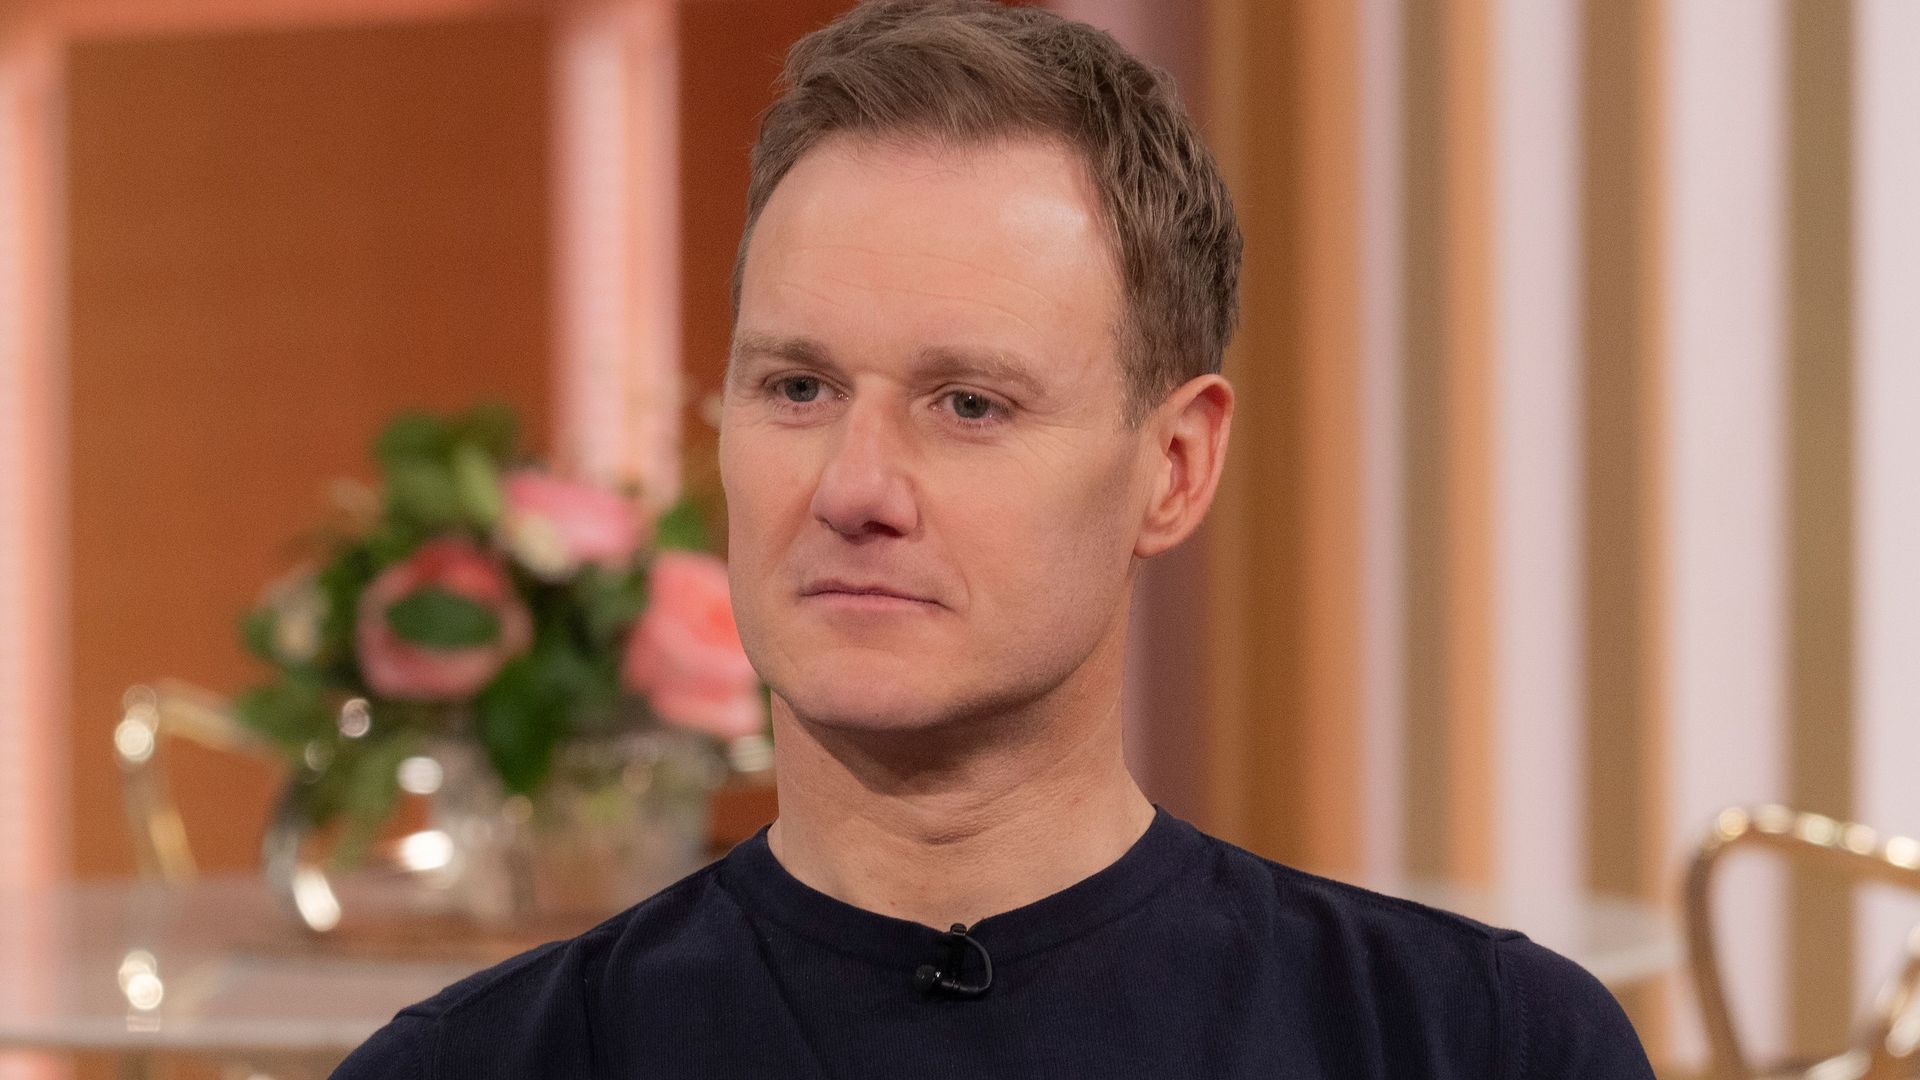 Channel 5's Dan Walker defends controversial outfit following 'disgrace' TV appearance